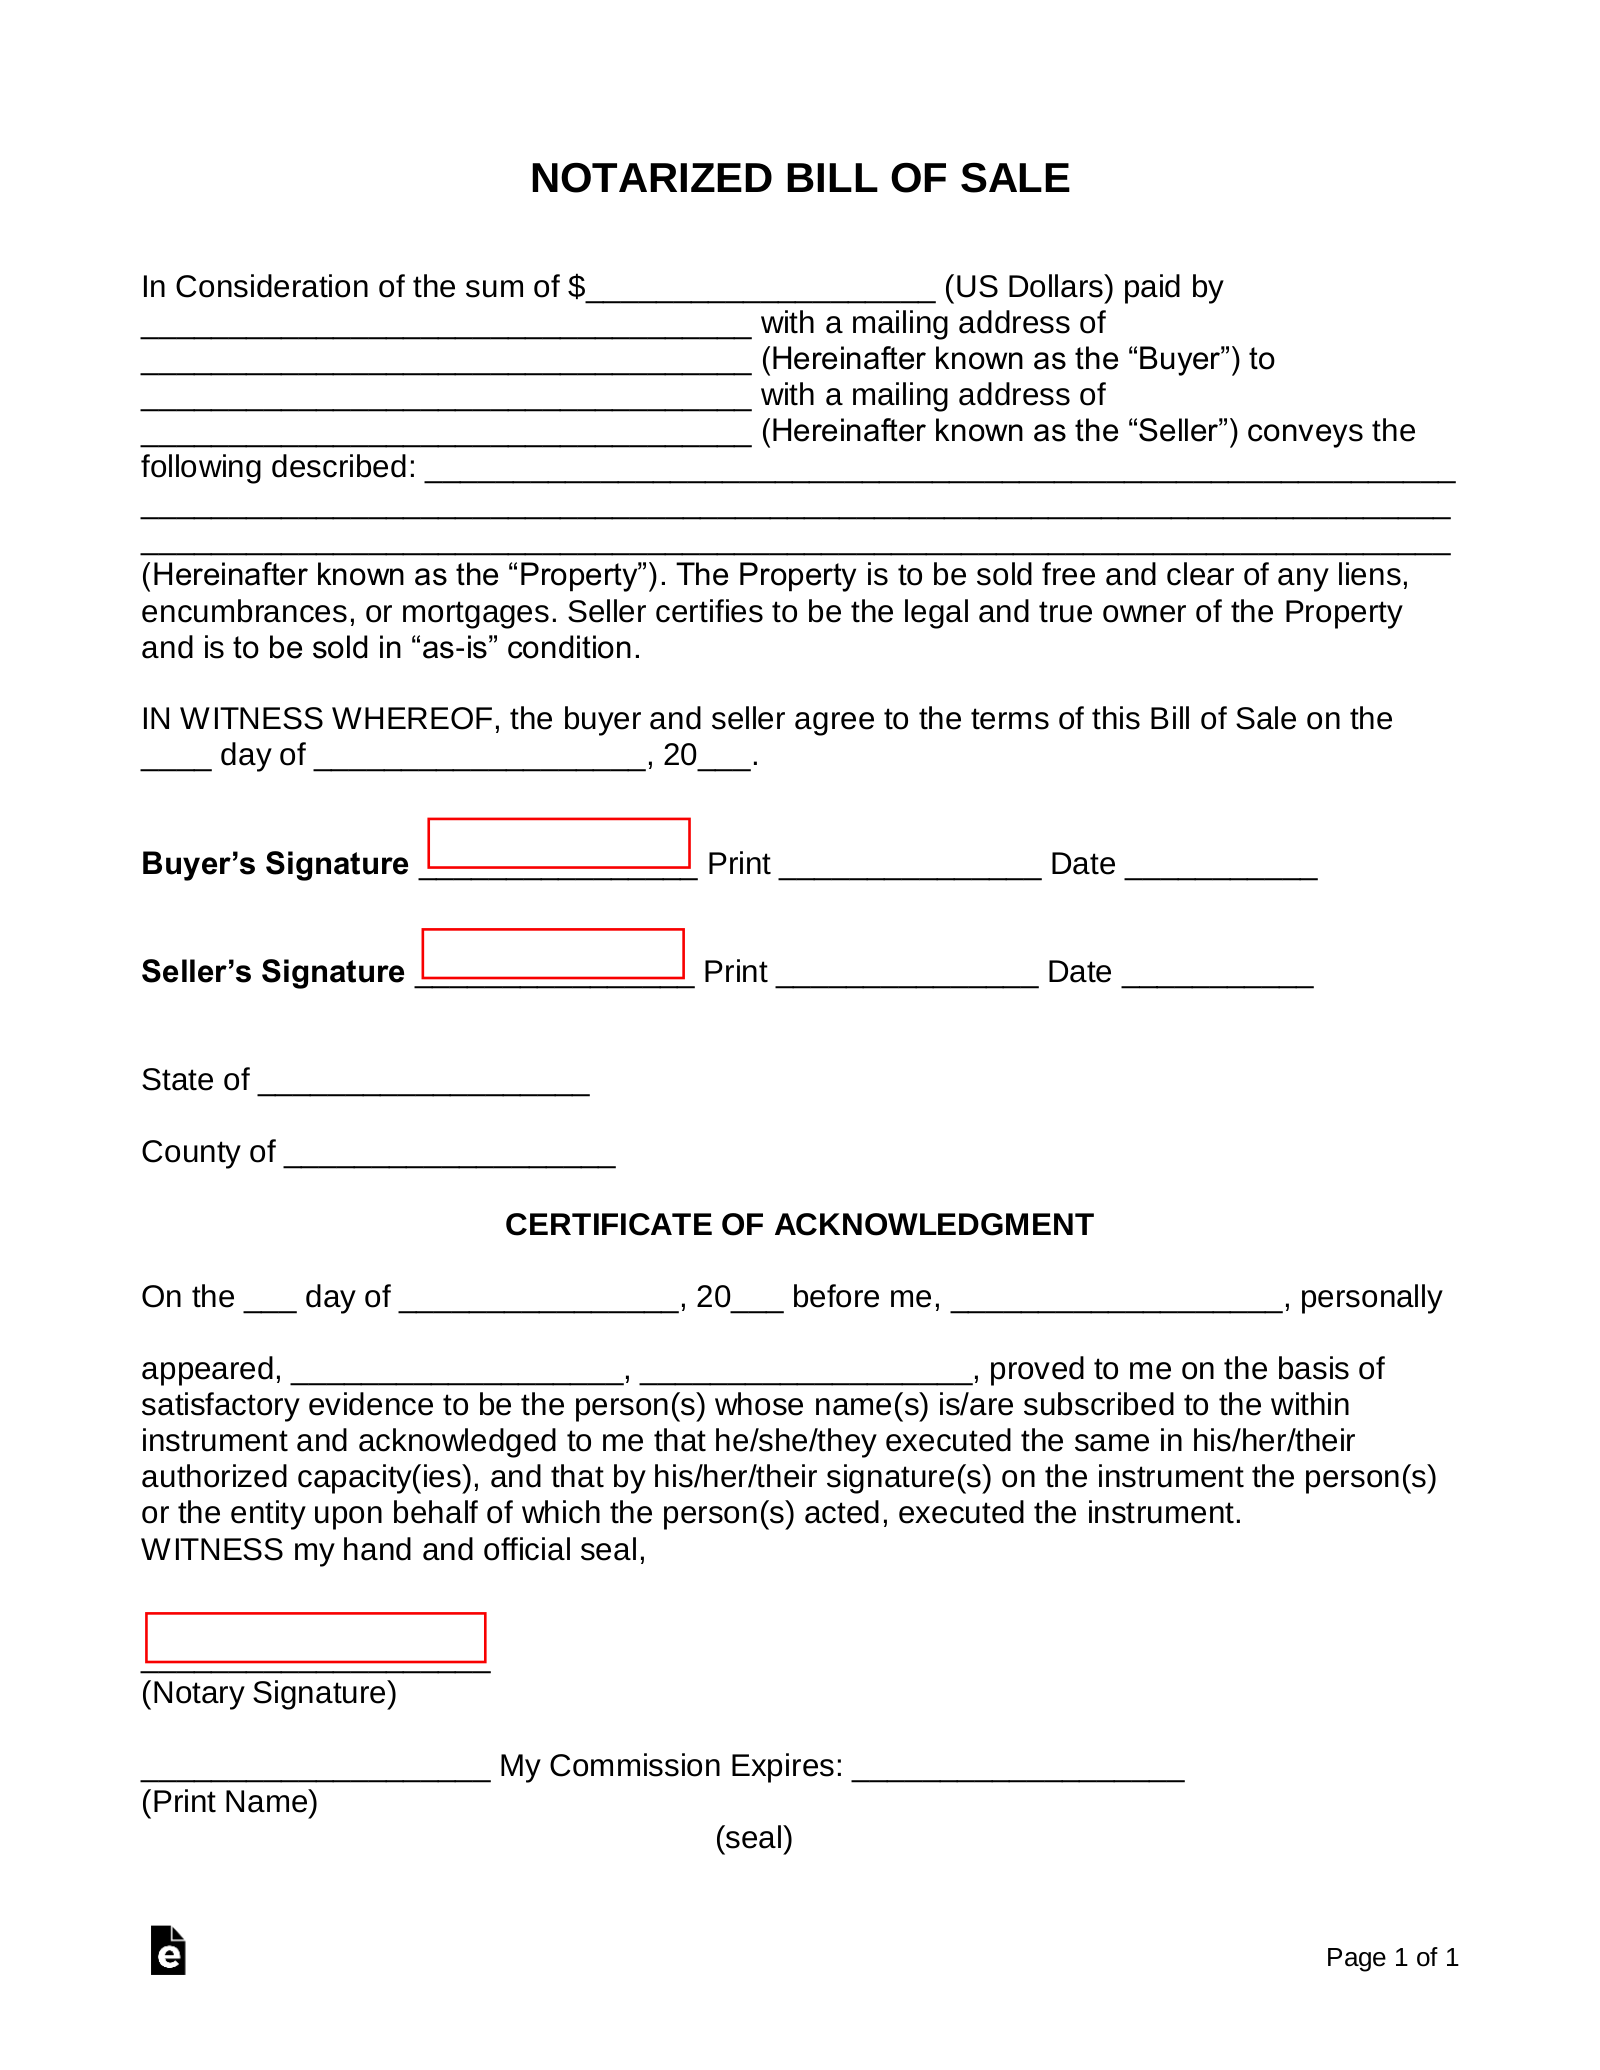 Free Notarized Bill of Sale Form - Word | PDF | eForms ...